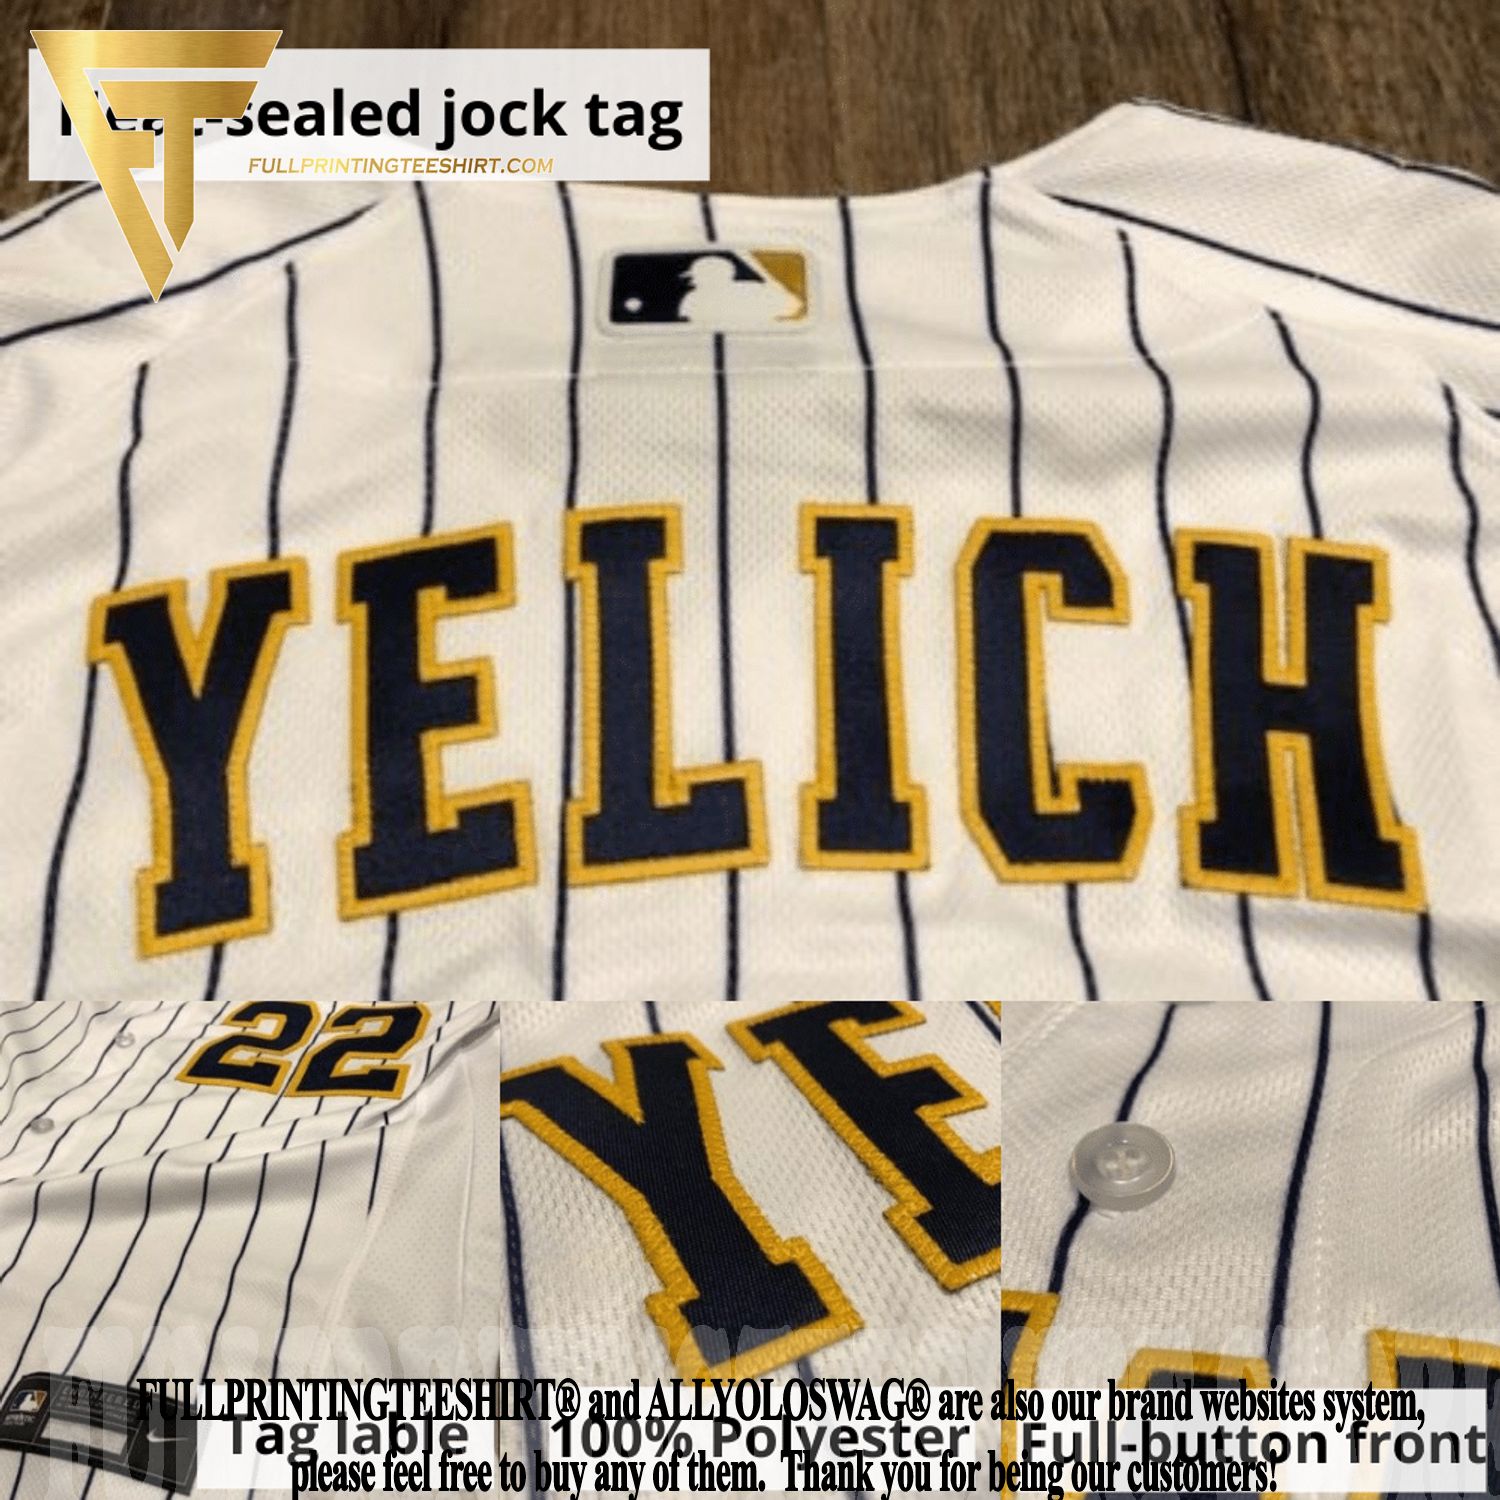 Milwaukee Brewers to wear 'City Connect' alternate jerseys this summer